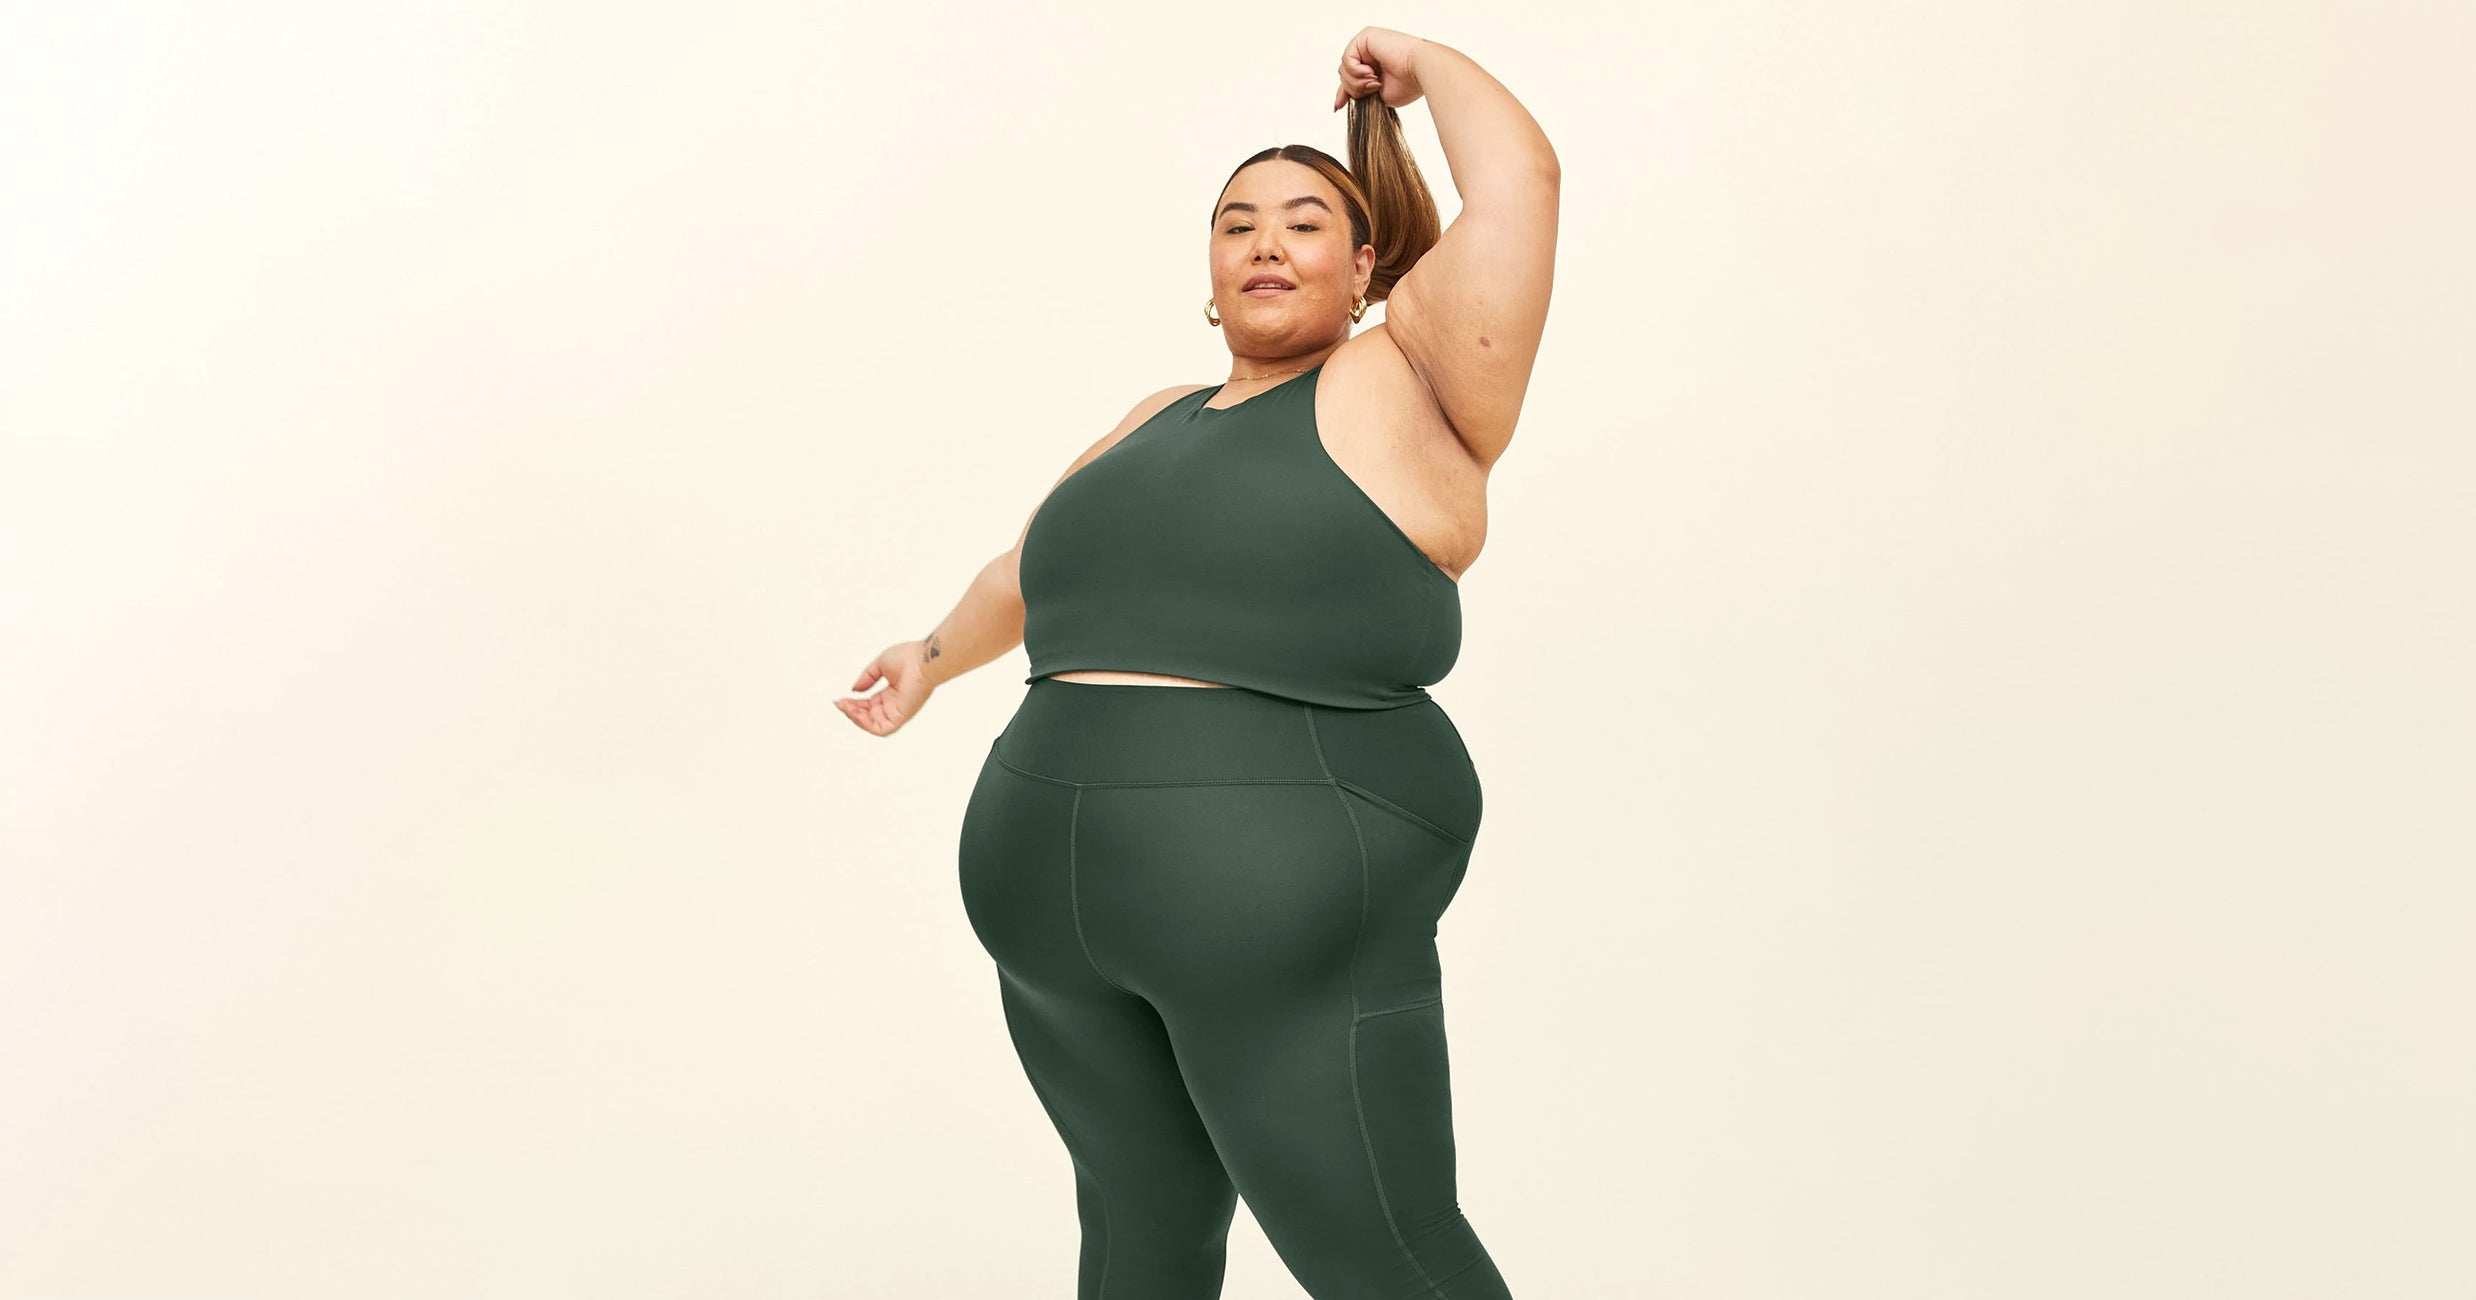 Why Did This Company Hire 'Size 2' Models to Sell Plus-Size Clothing?